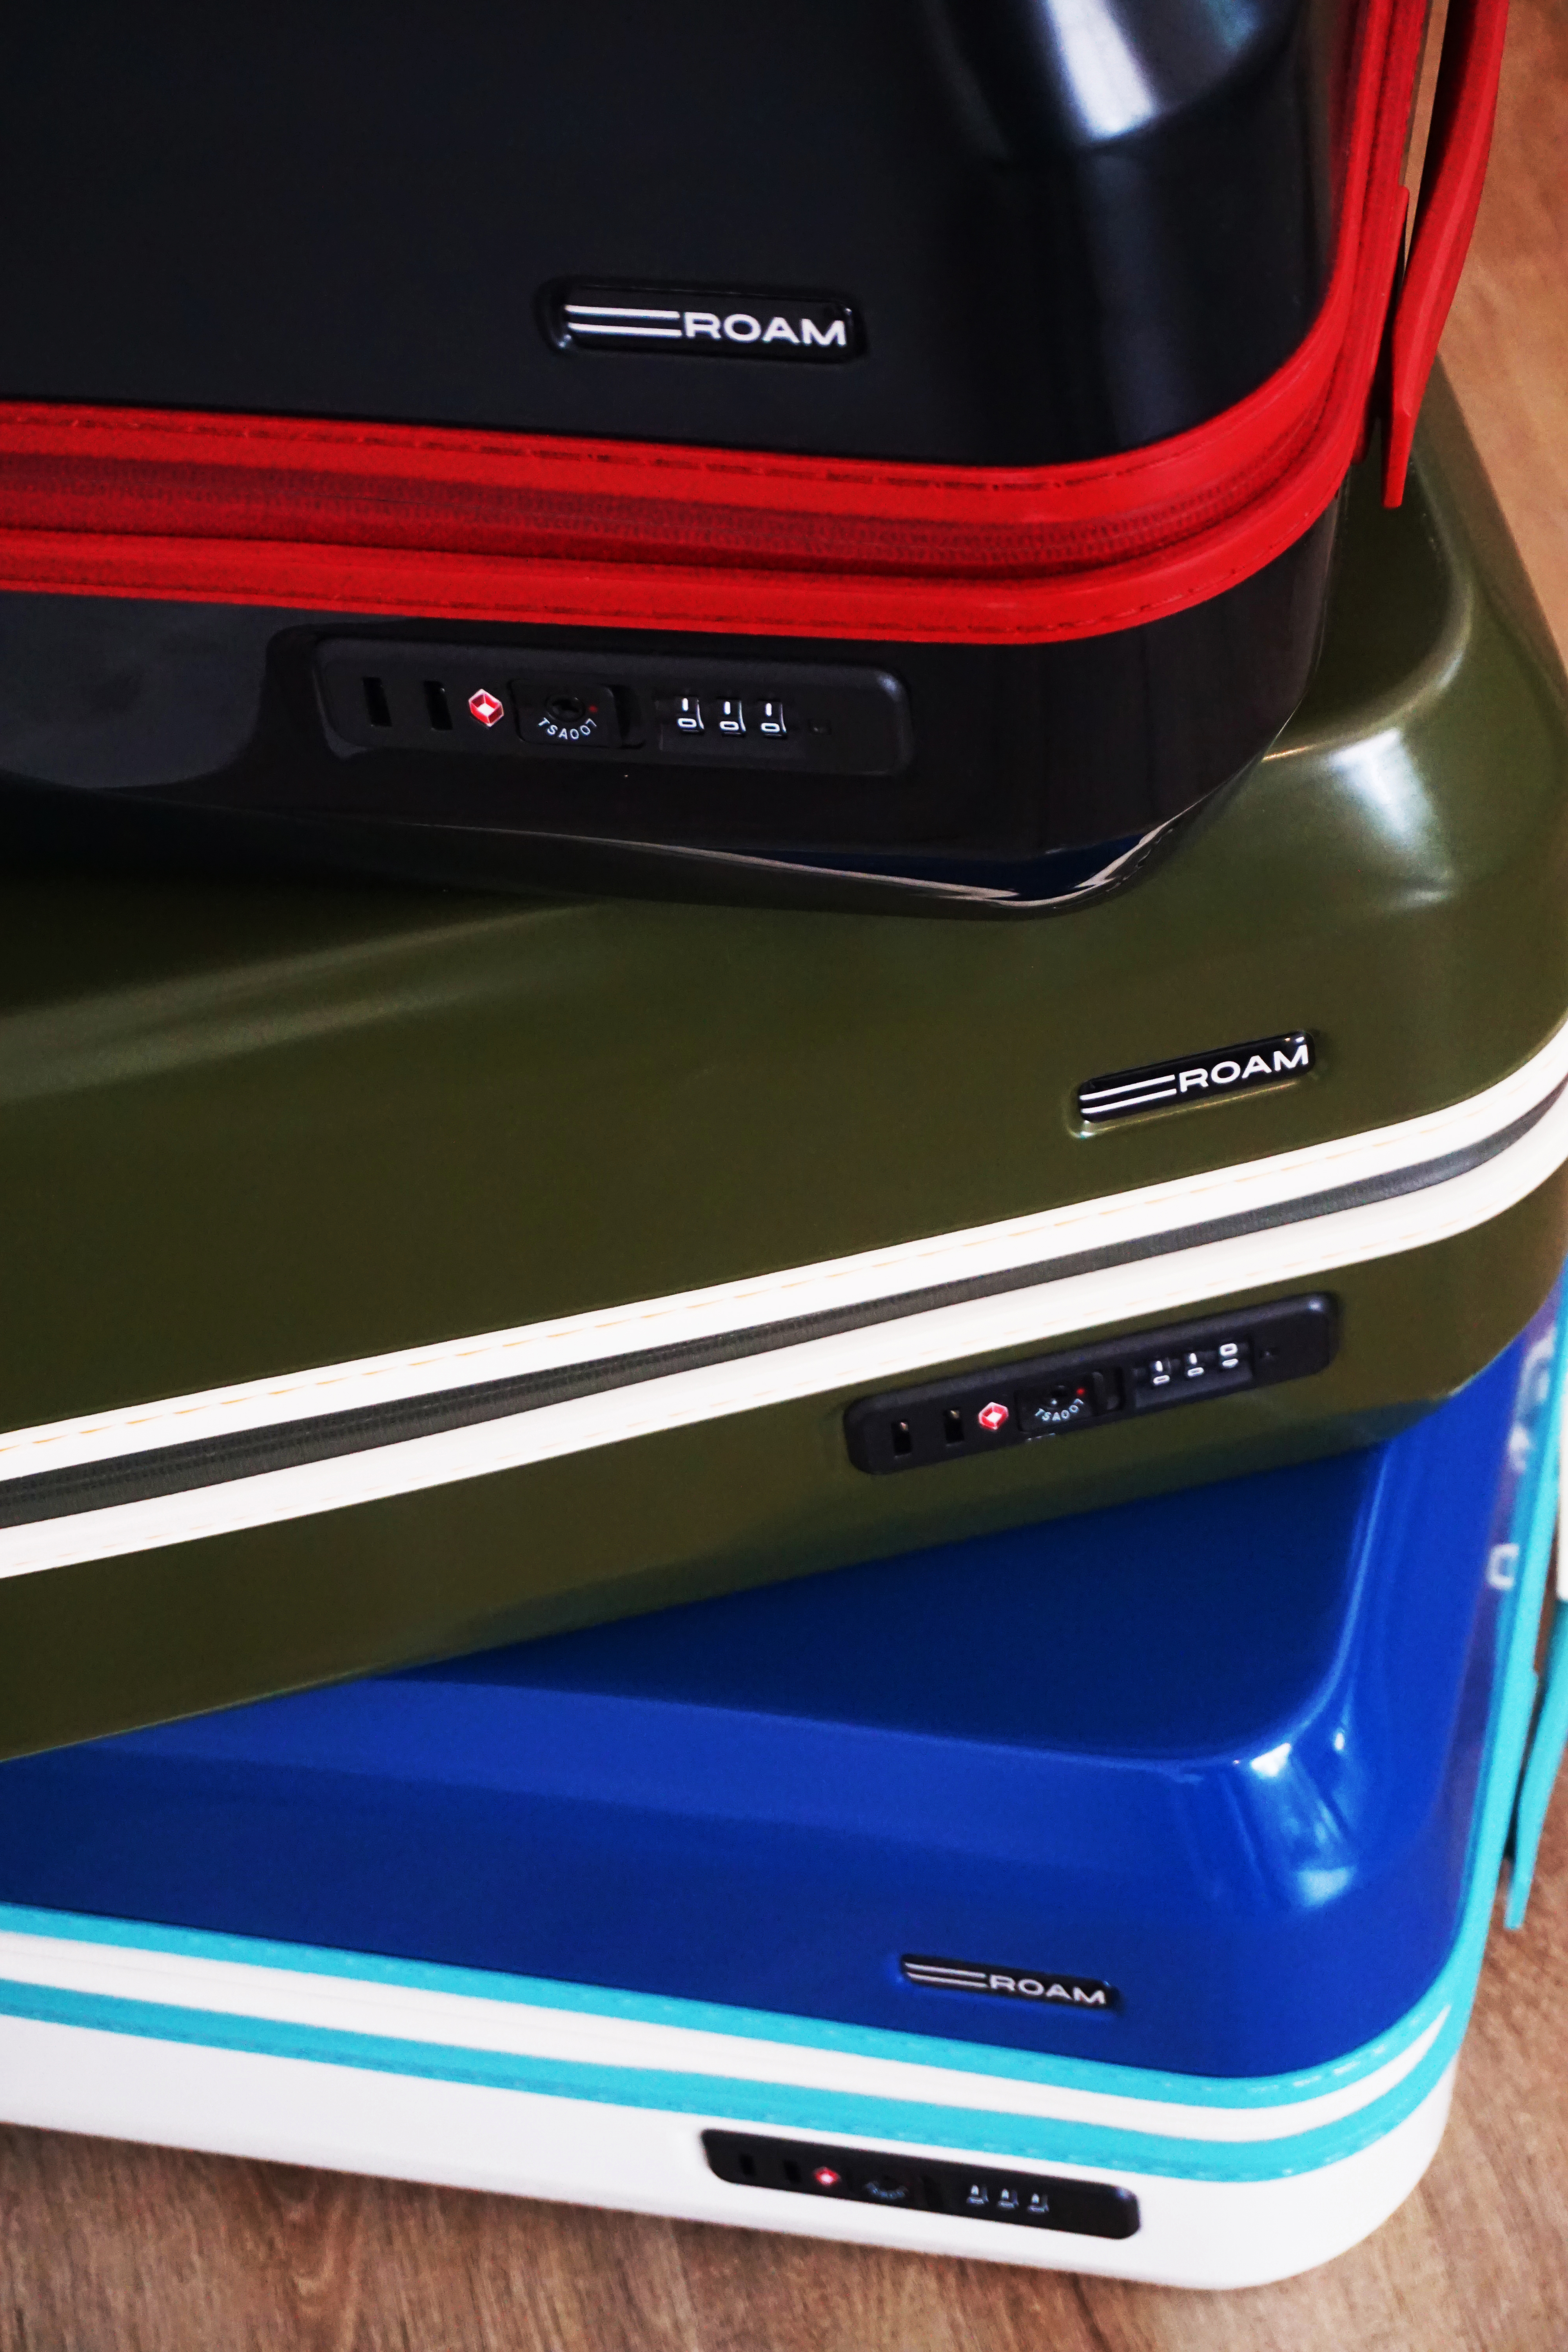 Roam luggage can be customized in 1 million different ways.